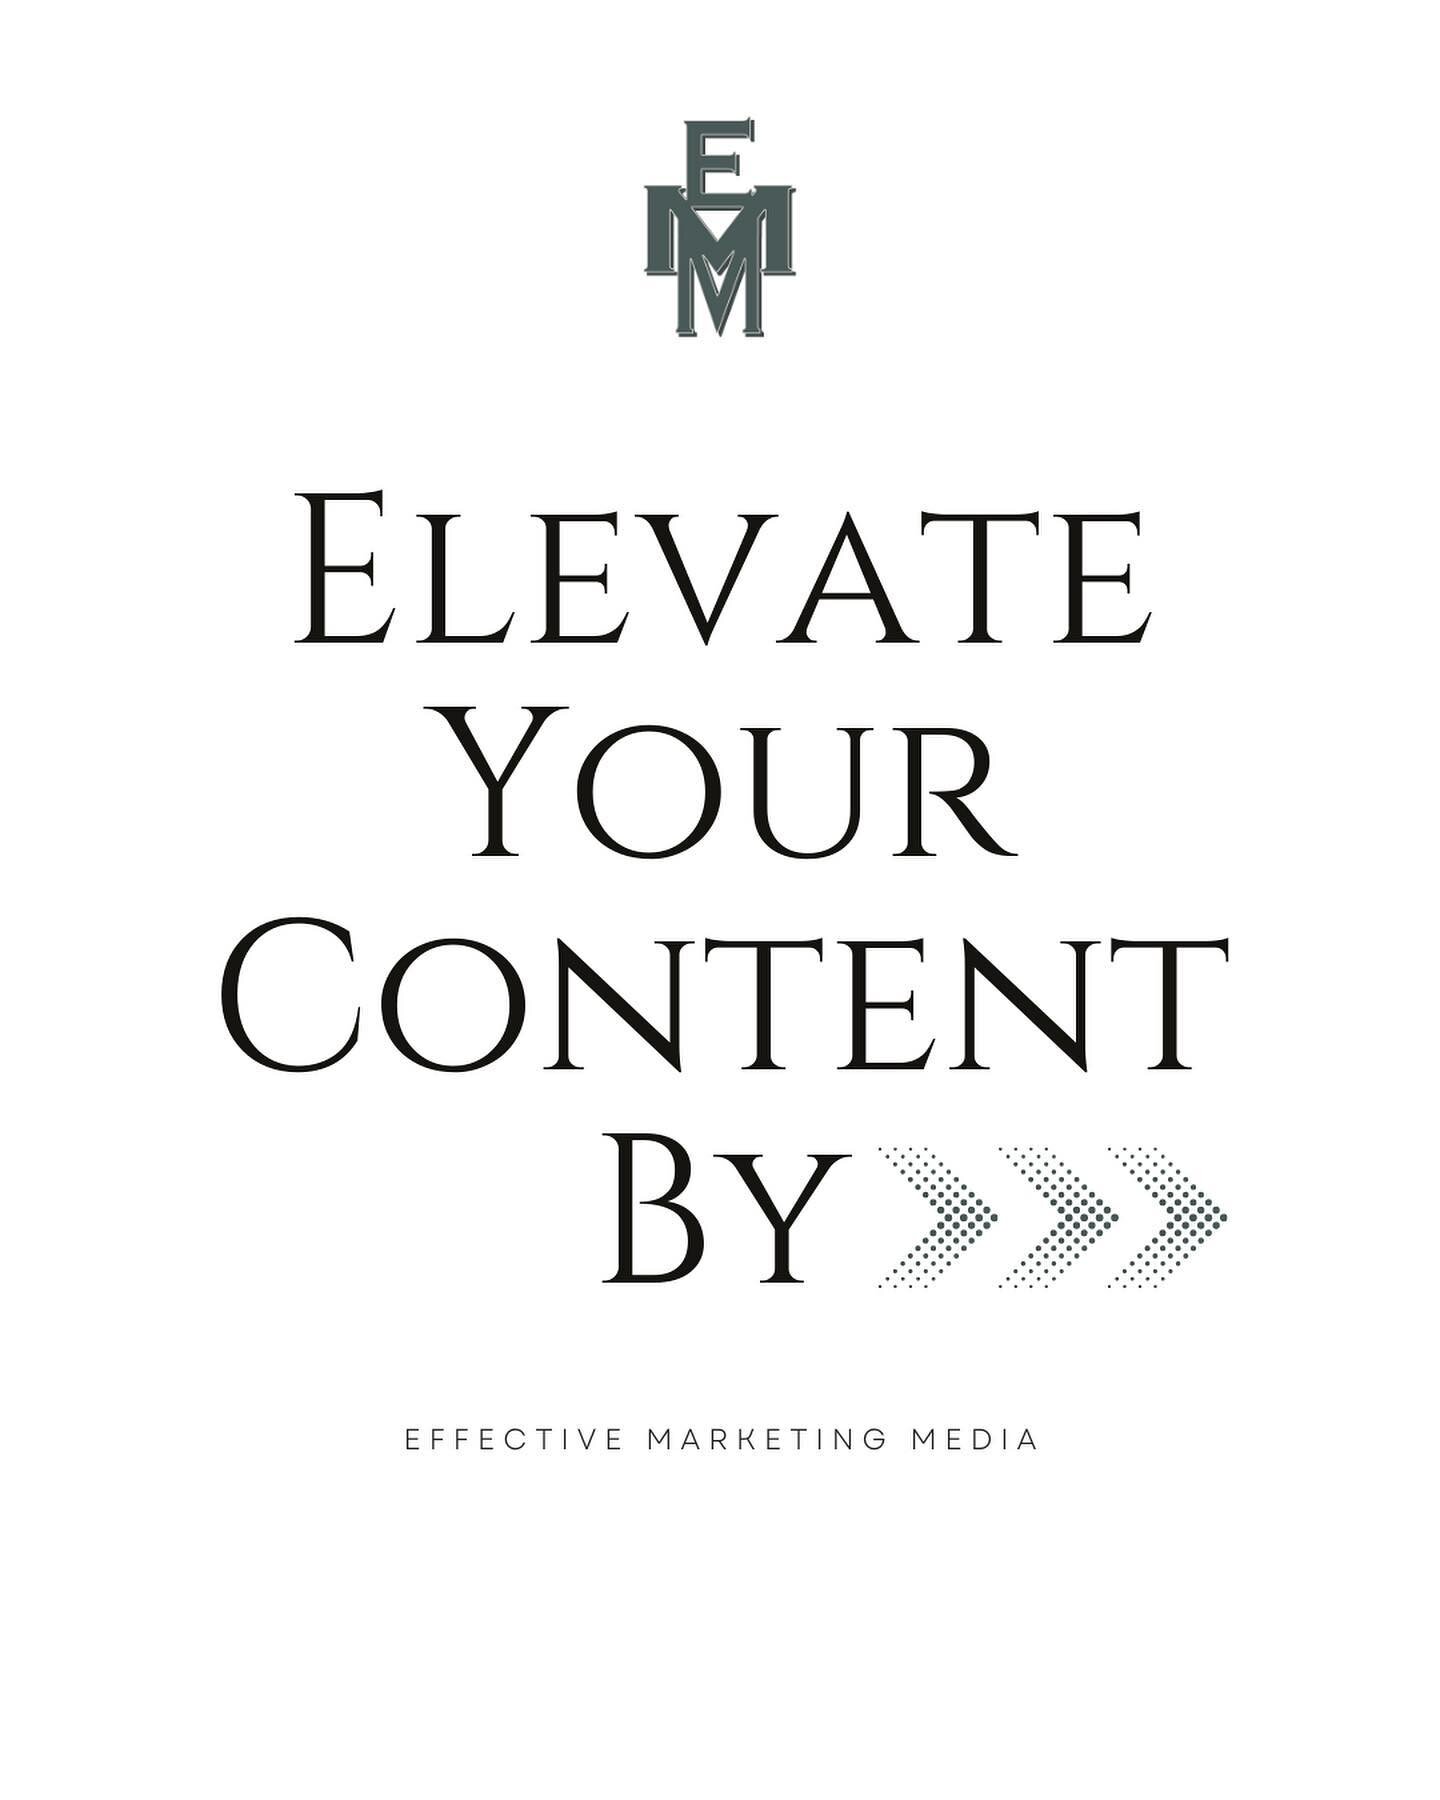 Are you looking to elevate your content on social media? Check out these three things to incorporate in your content strategy! ✅

DM me to learn more about how you can level up your content game! 🤩